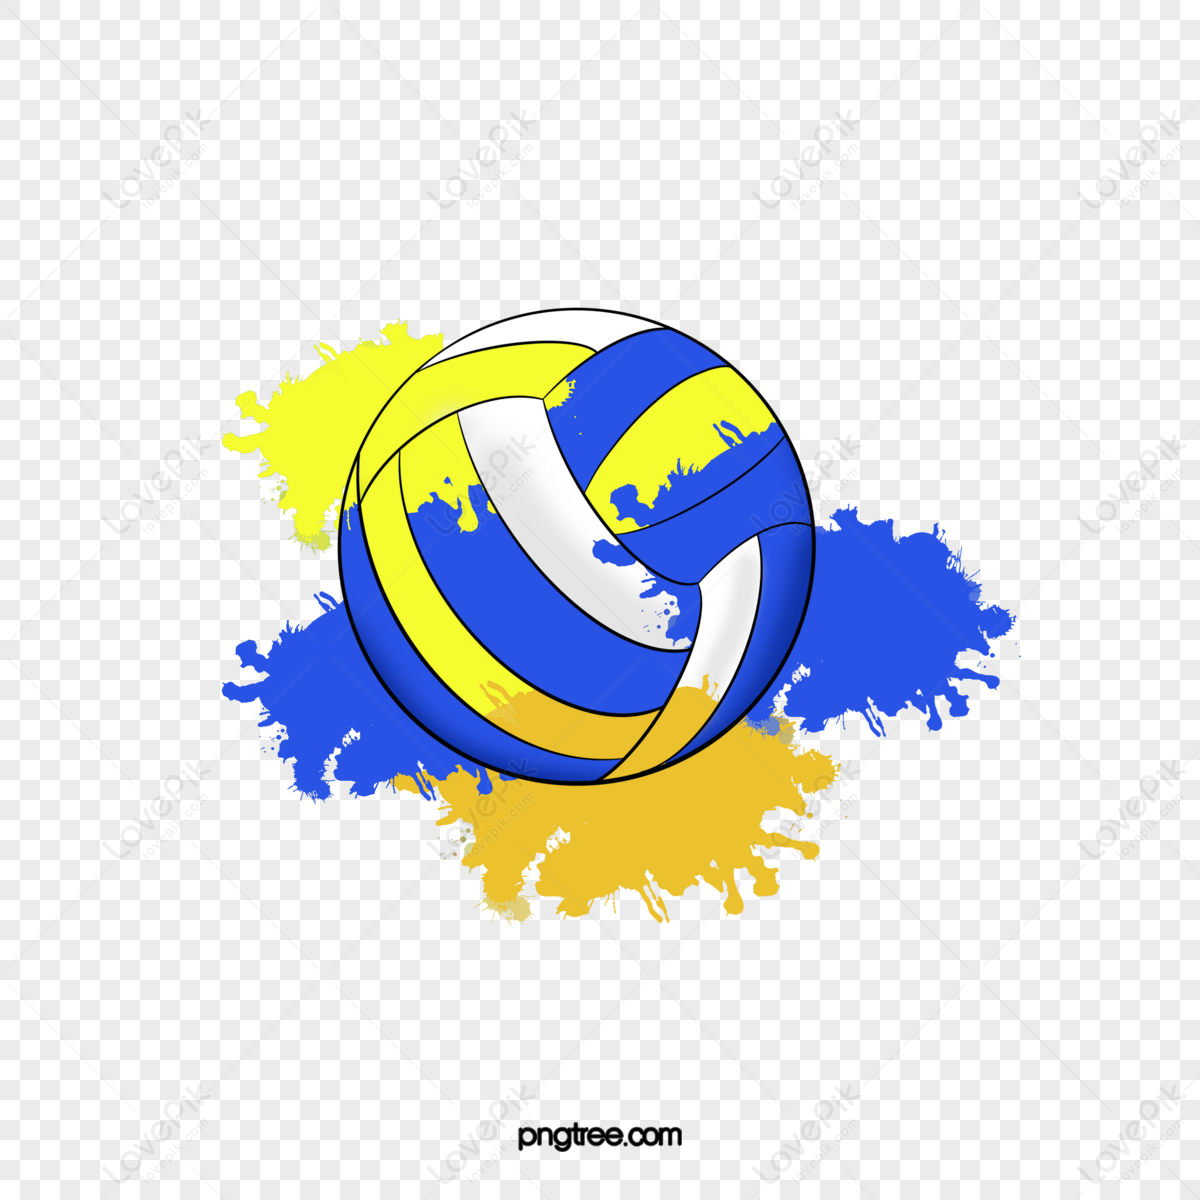 Cartoon Watercolor Yellow And Blue Volleyball,motion,physical Education ...